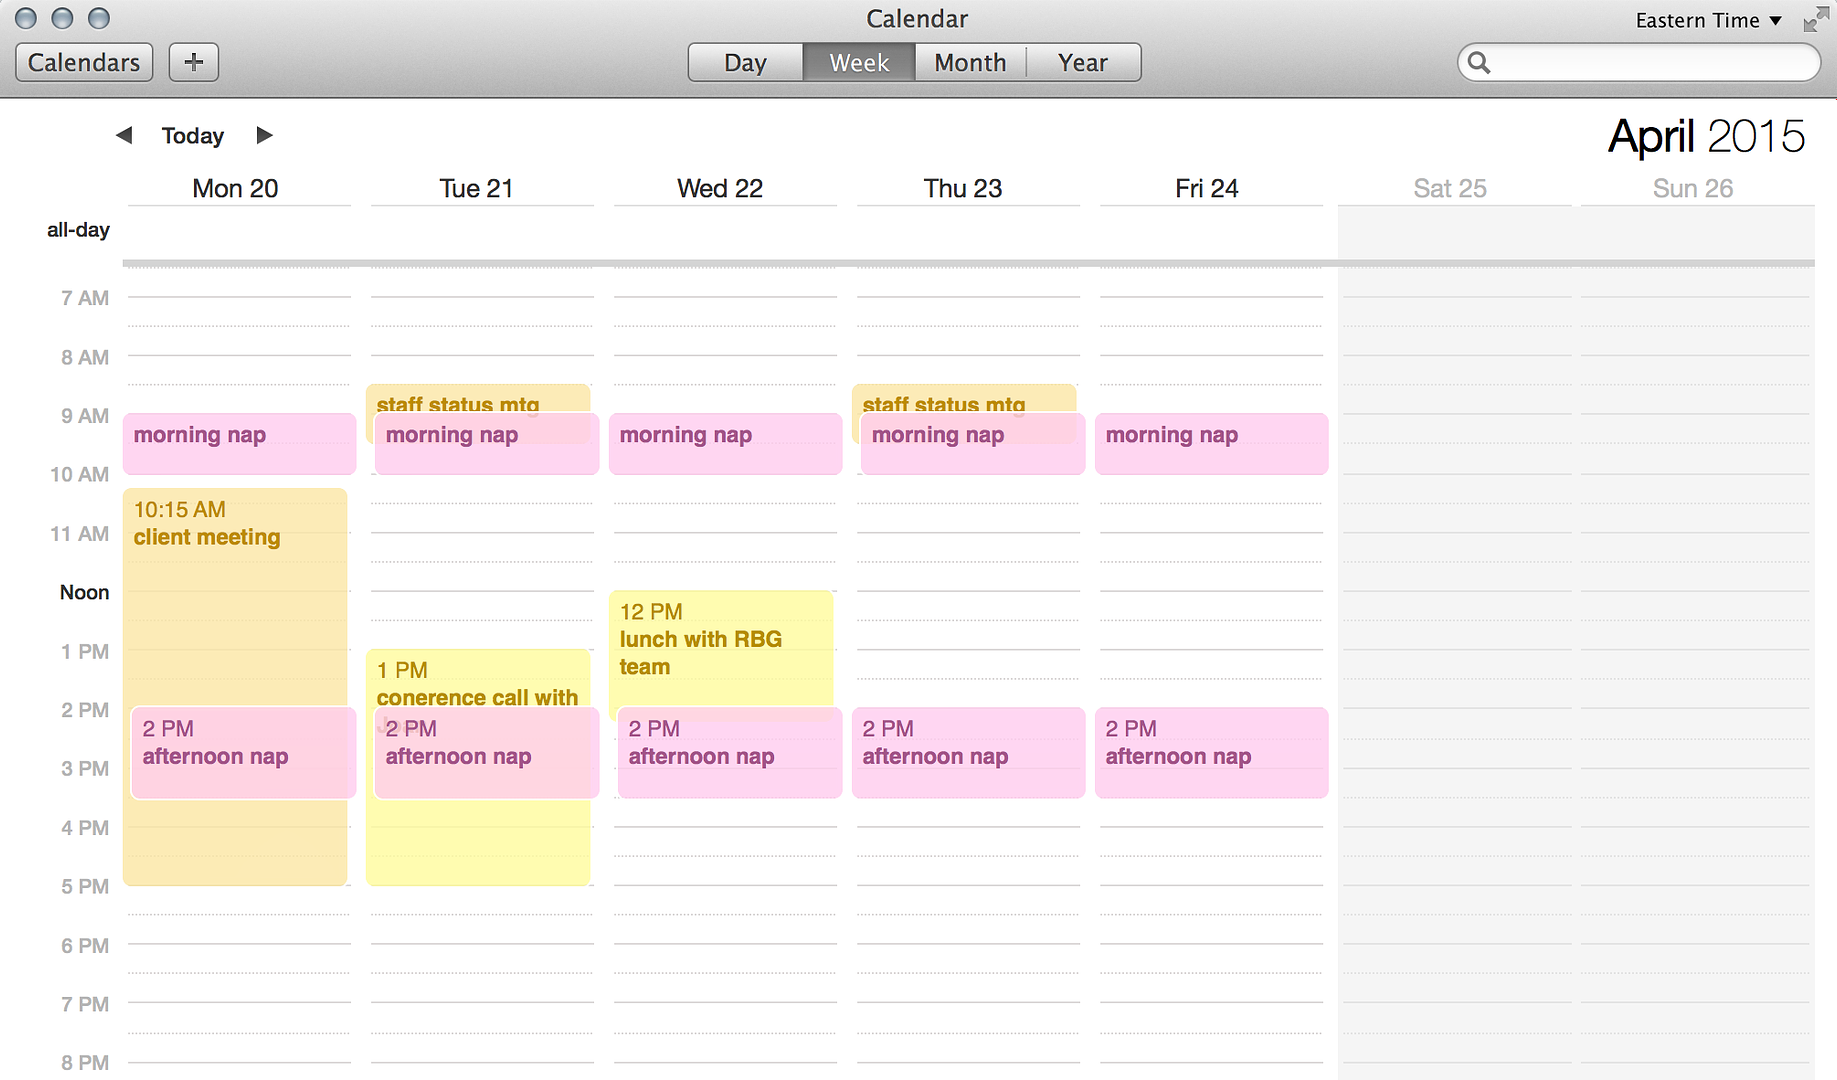 Tips for new parents returning to work: Create a shared calendar with the baby's schedule